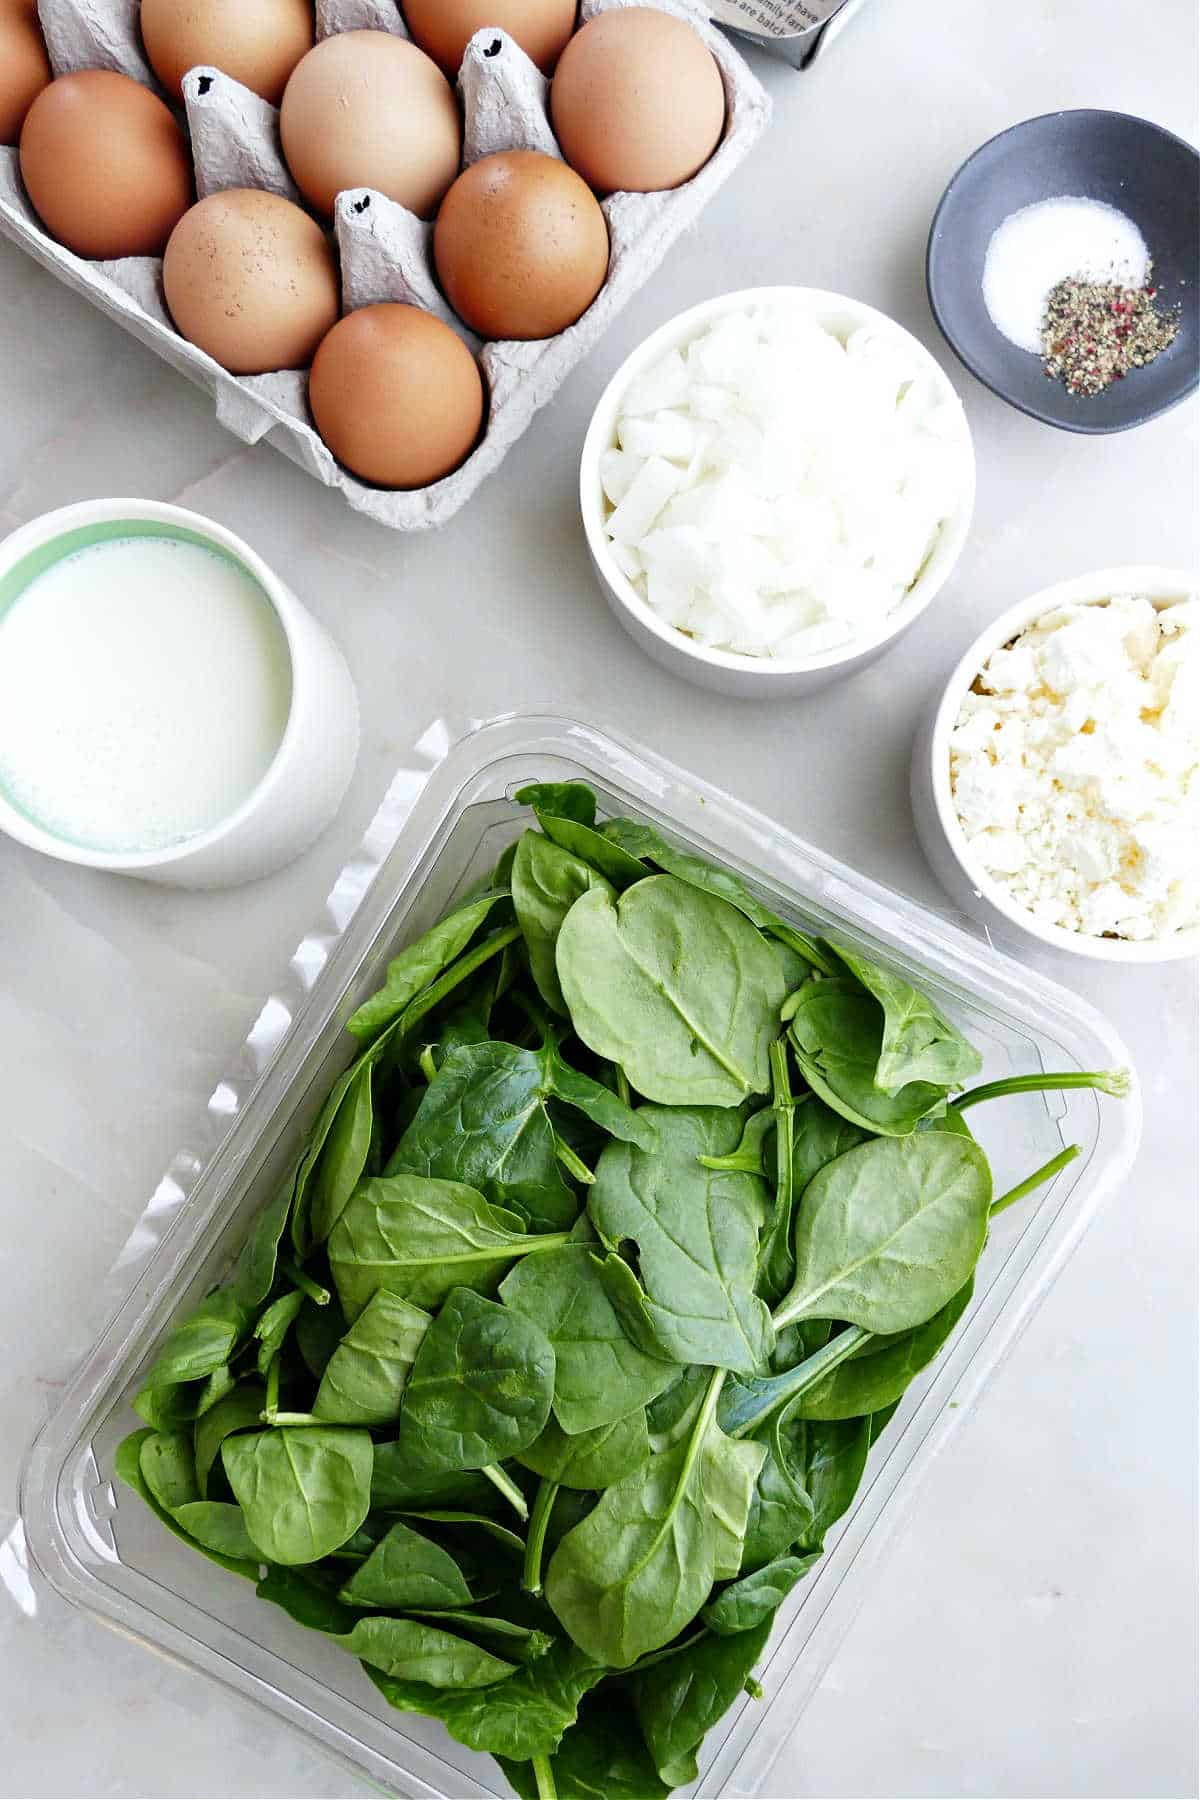 Ingredients needed to make spinach feta egg bake.